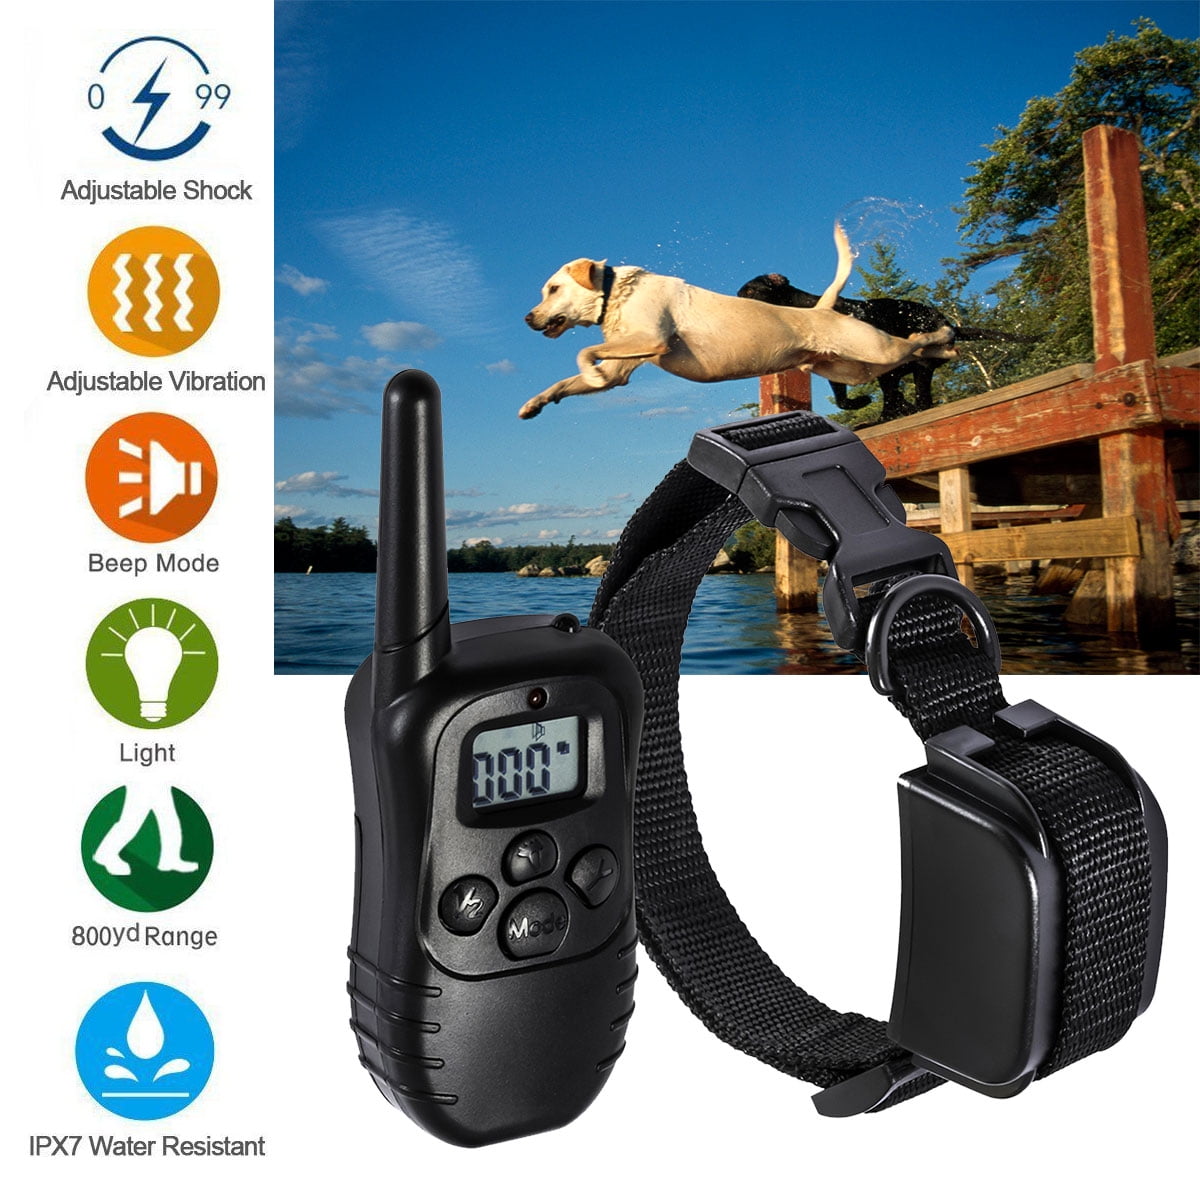 Blk/Silver Details about   GoodBoy GB812 Dog Training Remote Collar with Vibration/Shock Modes 